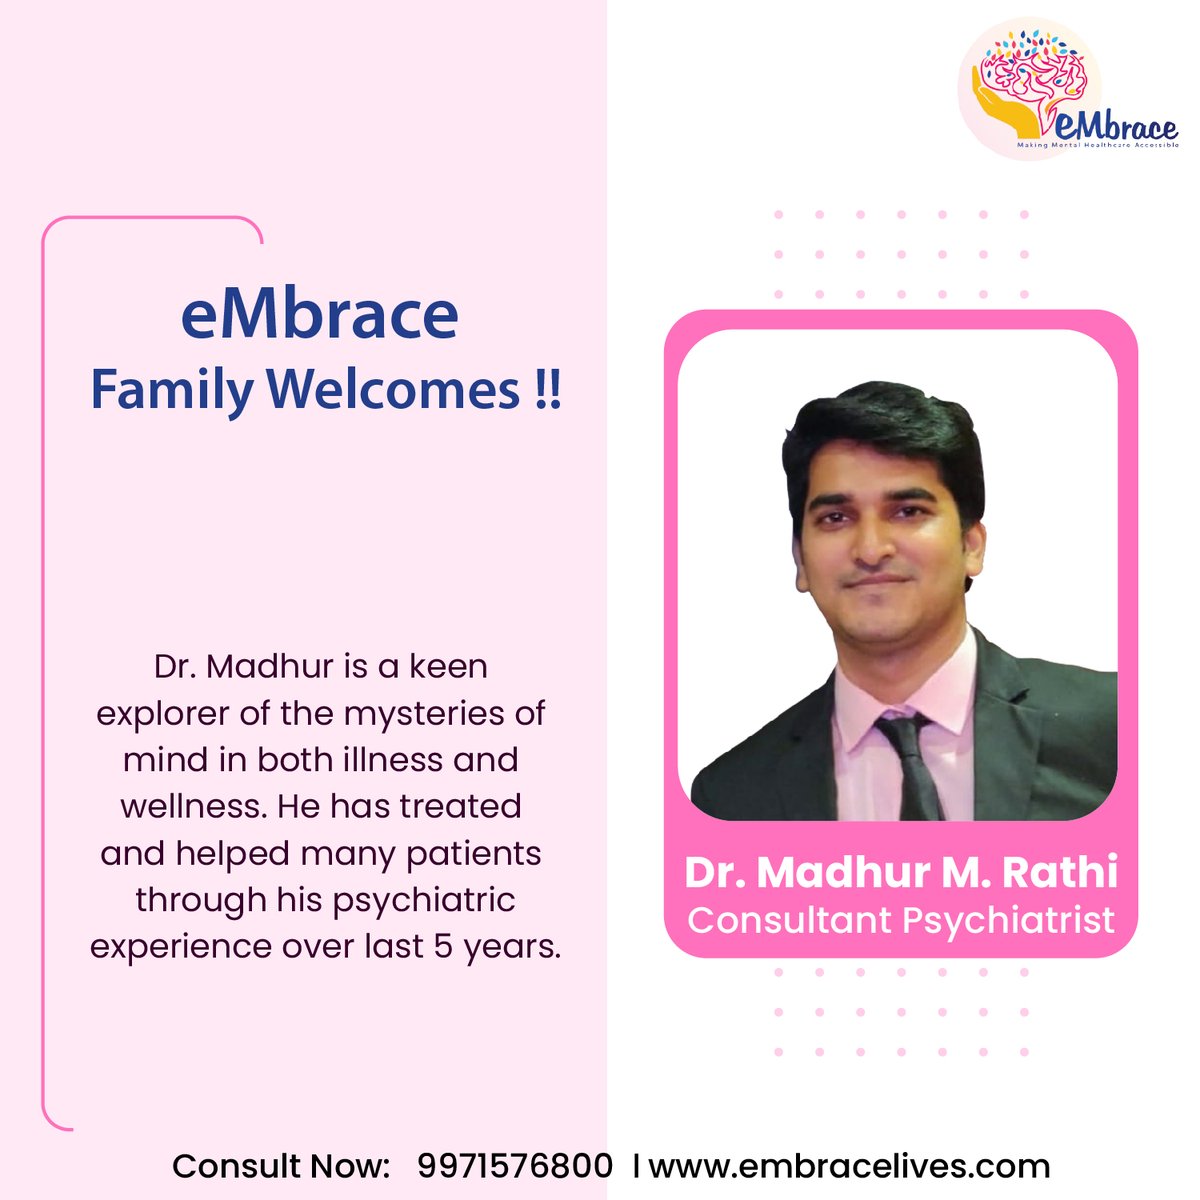 Meet our newest team member, Dr. Madhur M. Rathi, consultant psychiatrist at eMbrace Lives  Let's work together  to enhancing mental health and well-being.

#mentalhealthmatters #embracelives #welcomeaboard #MeetTheExperts #newhorizons

@DrMaddyRathi